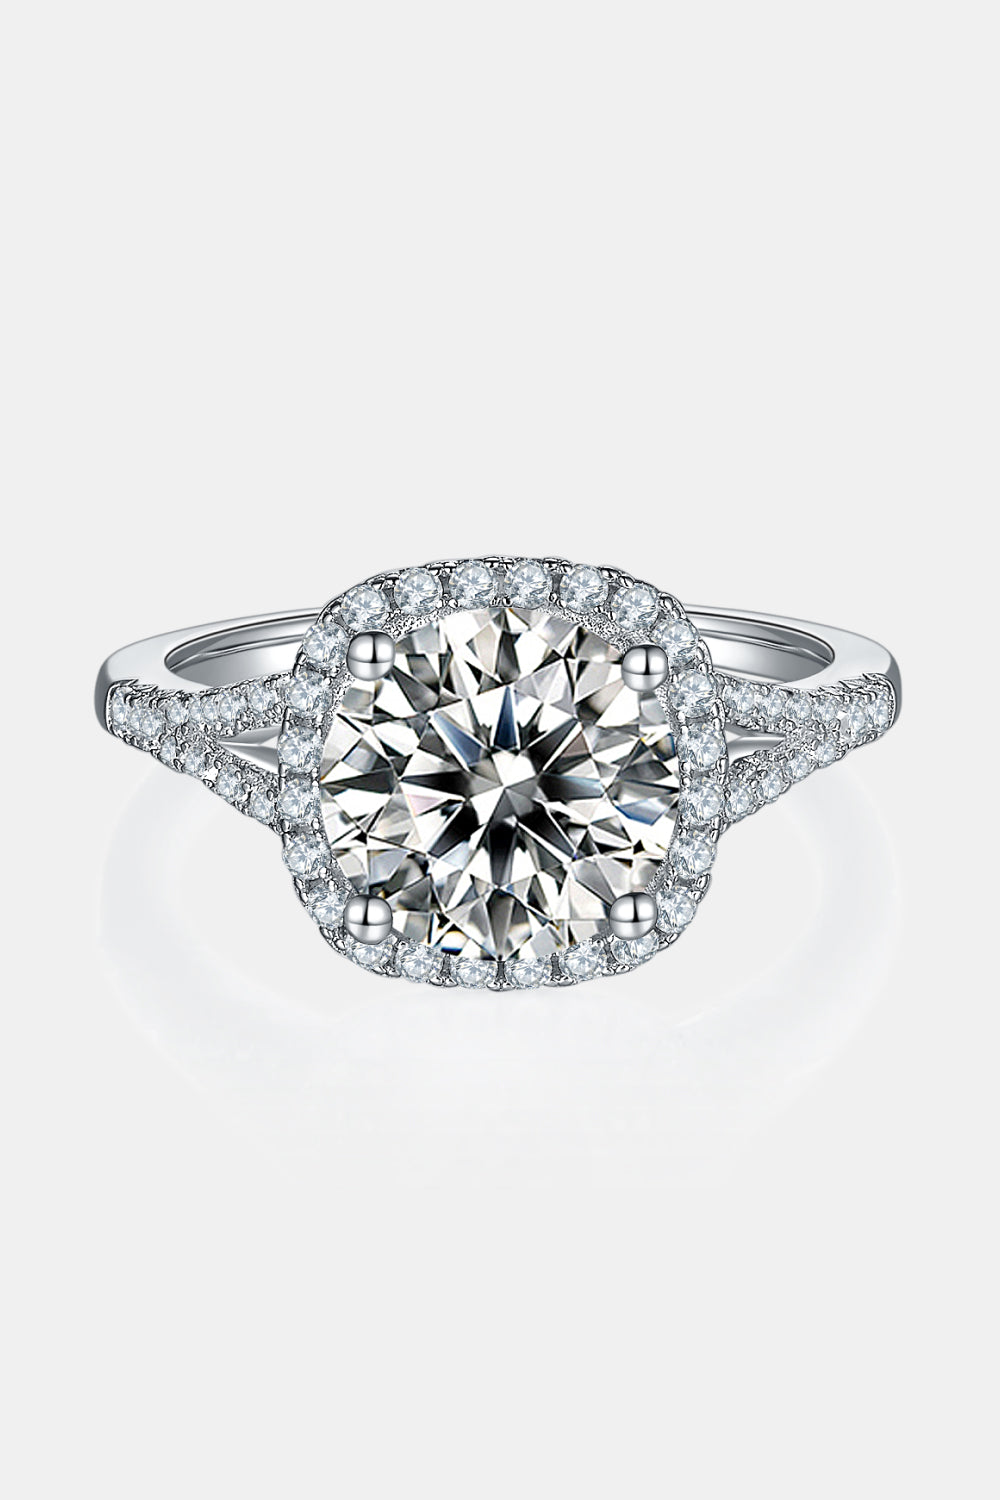 3 Carat Round Brilliant Cut Moissanite Halo Ring (Platinum Over Pure Sterling Silver) - Sparkala